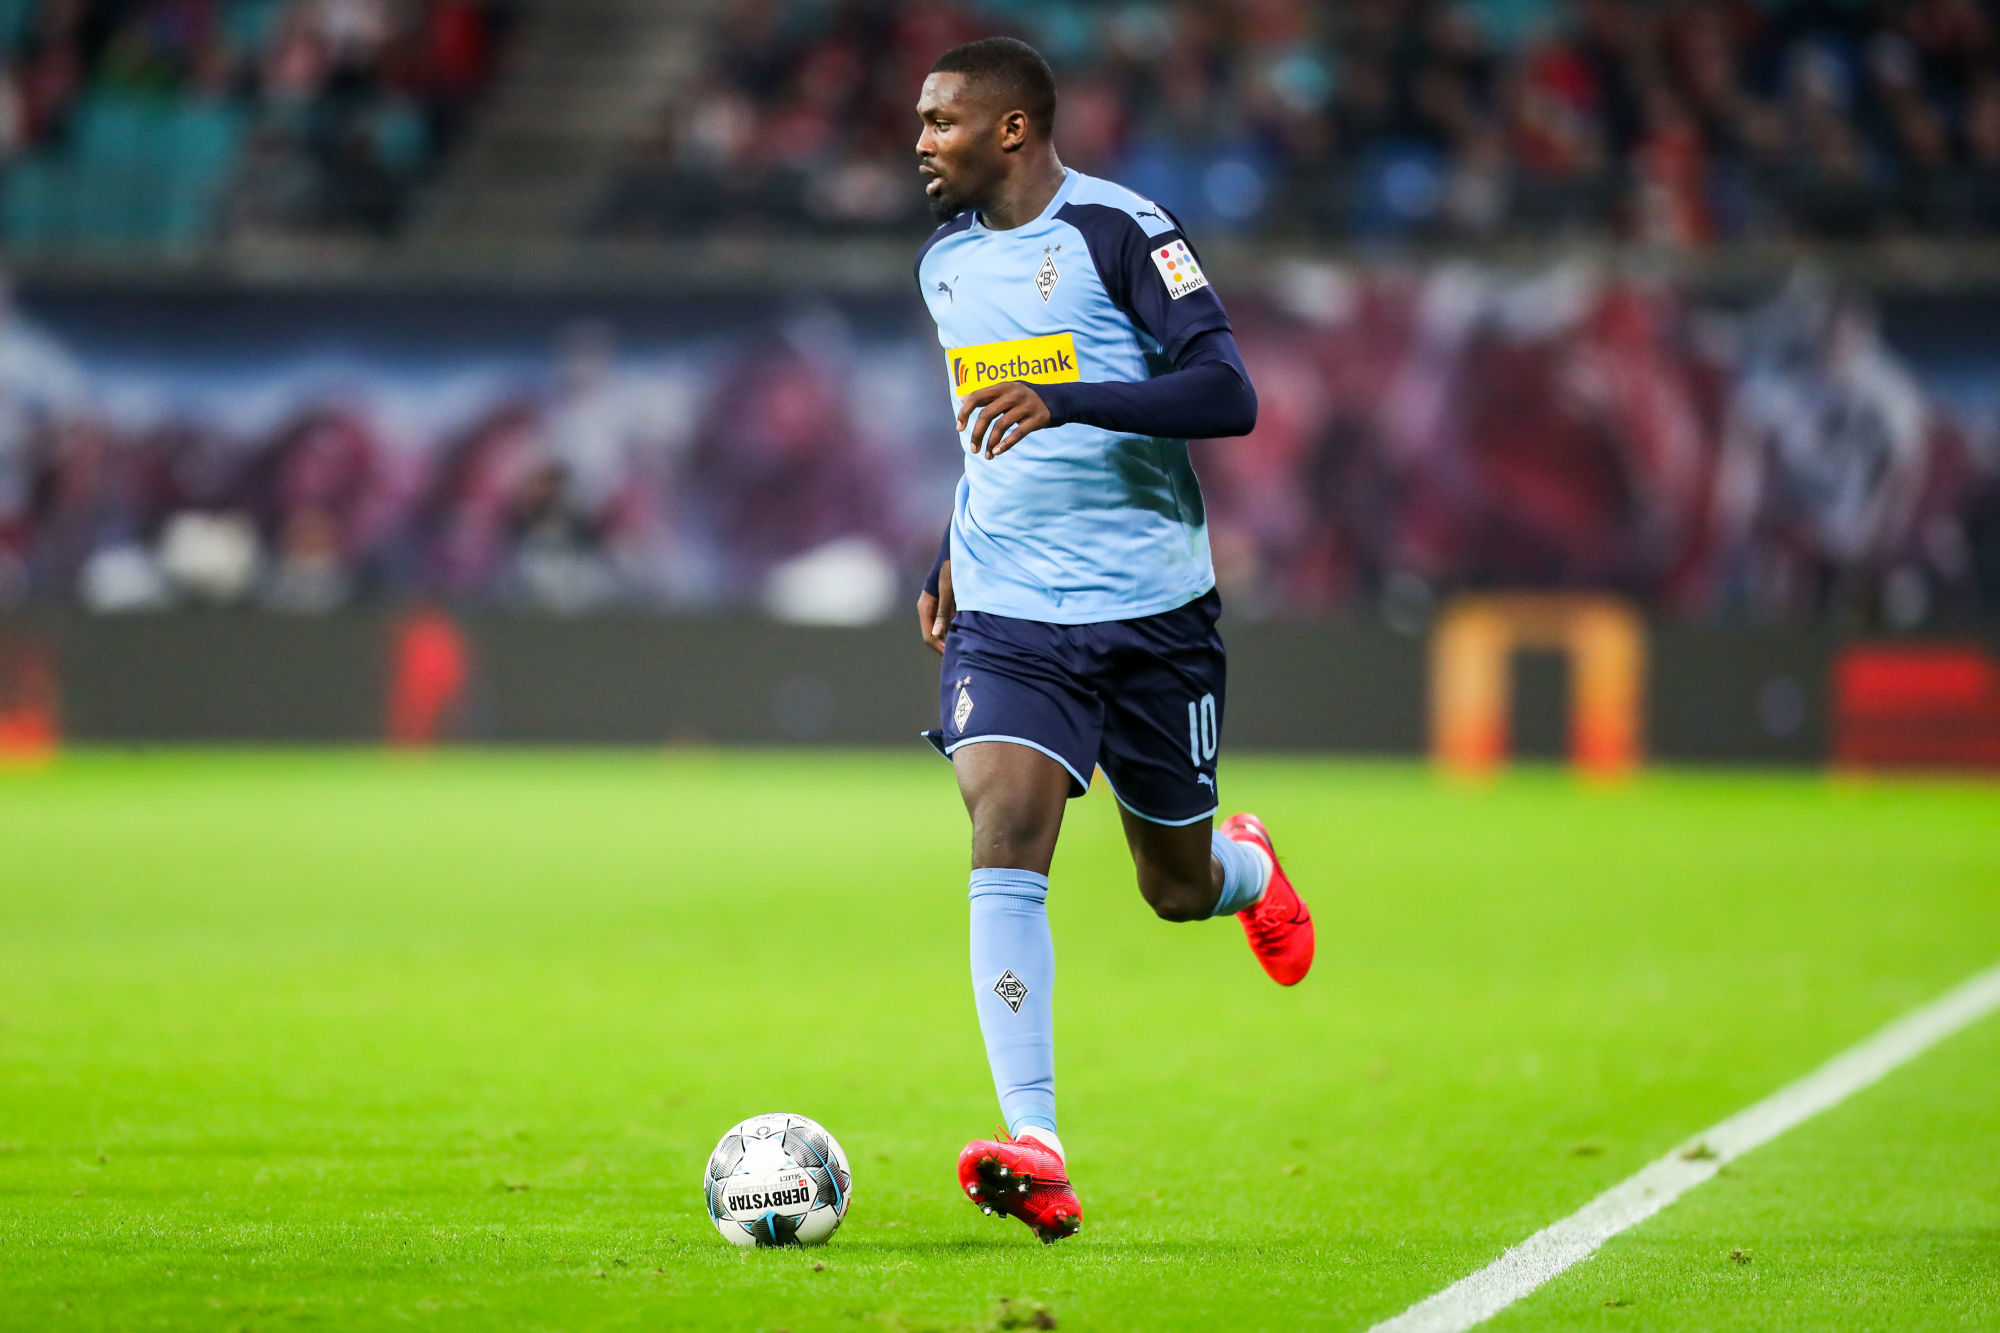 01 February 2020, Saxony, Leipzig: Football: Bundesliga, 20th matchday, RB Leipzig - Borussia Mˆnchengladbach in the Red Bull Arena Leipzig. Gladbach's player Marcus Thuram on the ball. Photo: Jan Woitas/dpa-Zentralbild/dpa - IMPORTANT NOTE: In accordance with the regulations of the DFL Deutsche Fu?ball Liga and the DFB Deutscher Fu?ball-Bund, it is prohibited to exploit or have exploited in the stadium and/or from the game taken photographs in the form of sequence images and/or video-like photo series. 

Photo by Icon Sport - Marcus THURAM - Red Bull Arena - Leipzig (Allemagne)